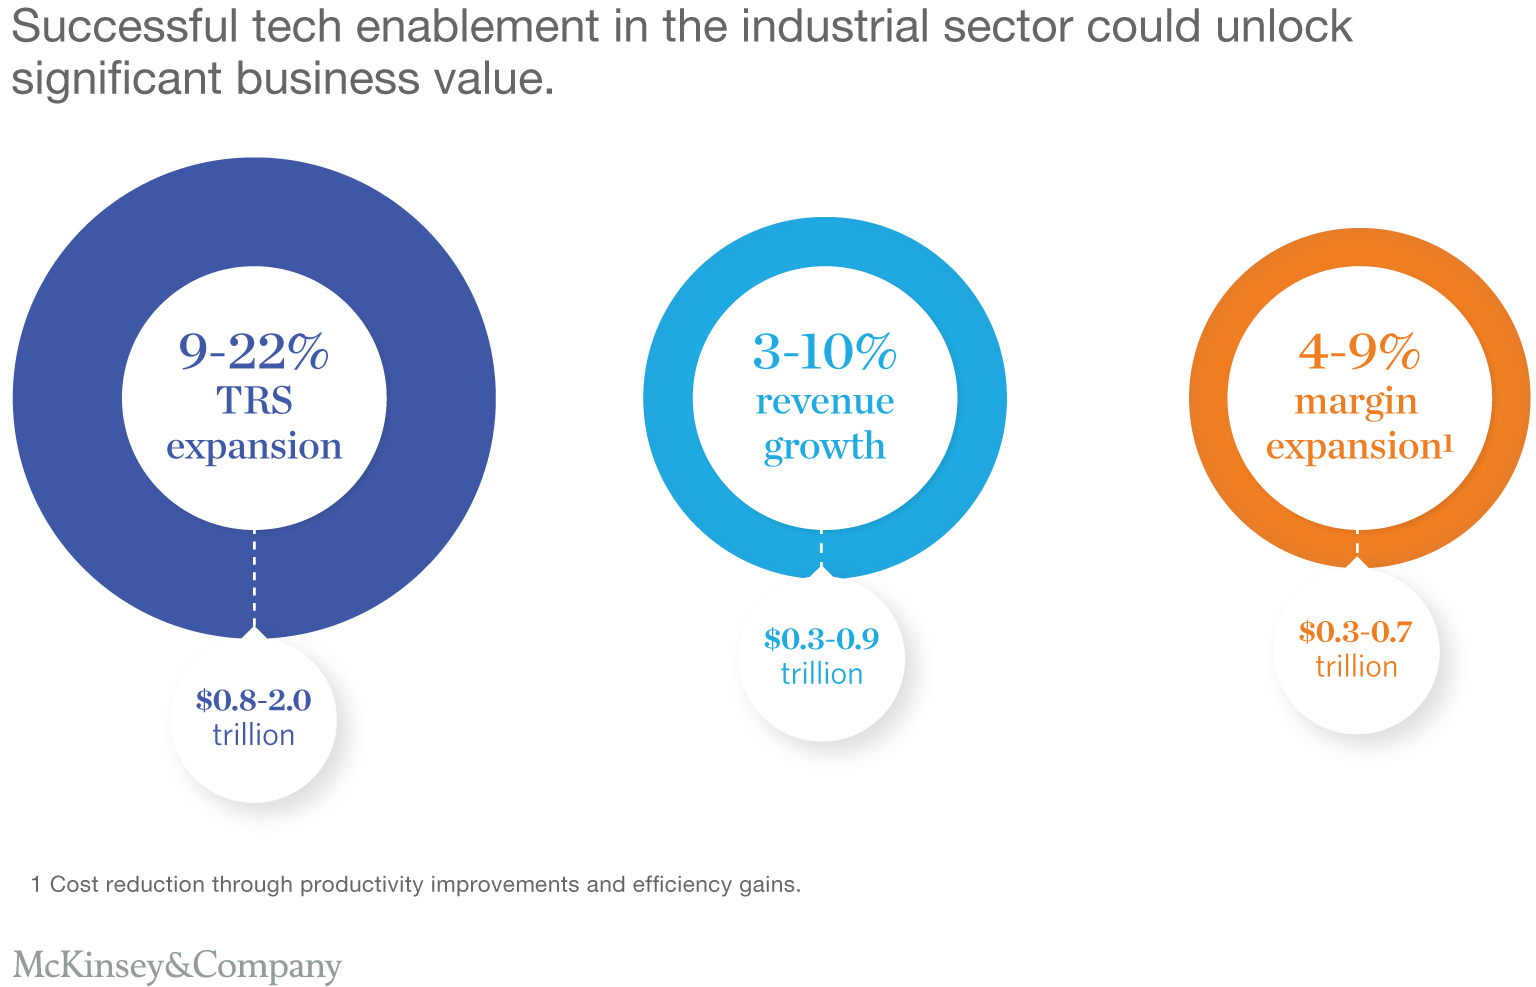 Successful tech enablement in the industrial sector could unlock significant business value.